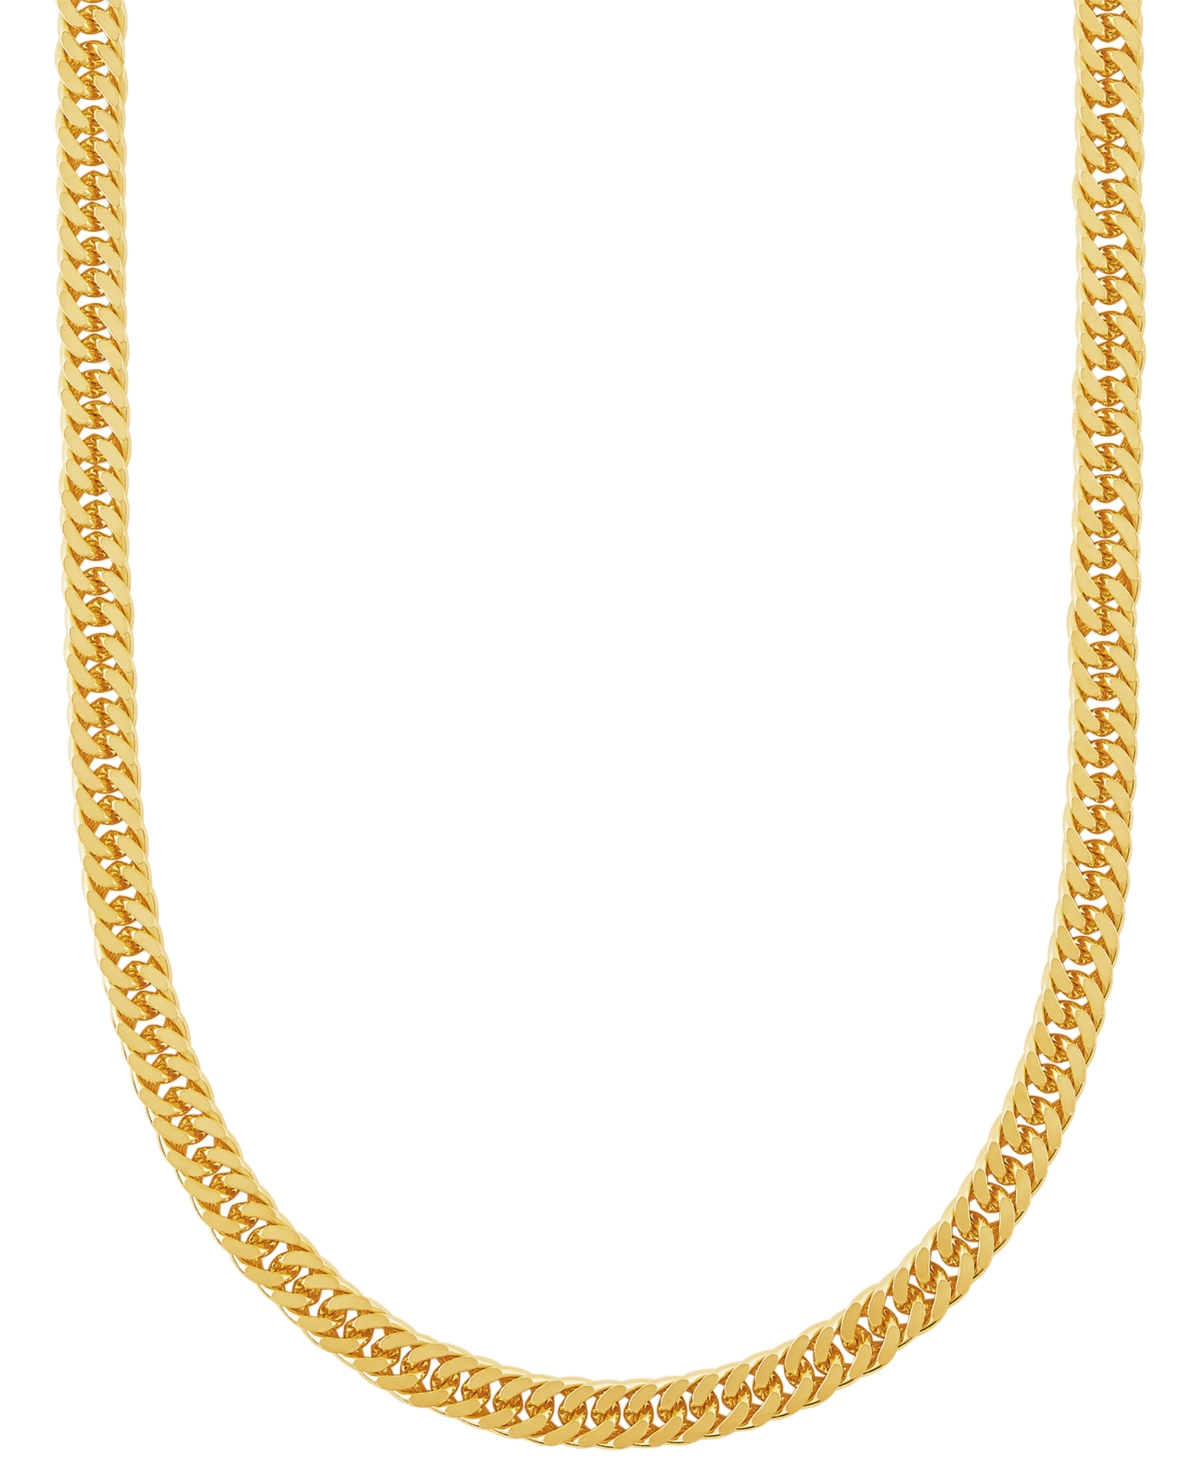 MACY'S CURB LINK 22" CHAIN NECKLACE IN 14K GOLD-PLATED STERLING SILVER